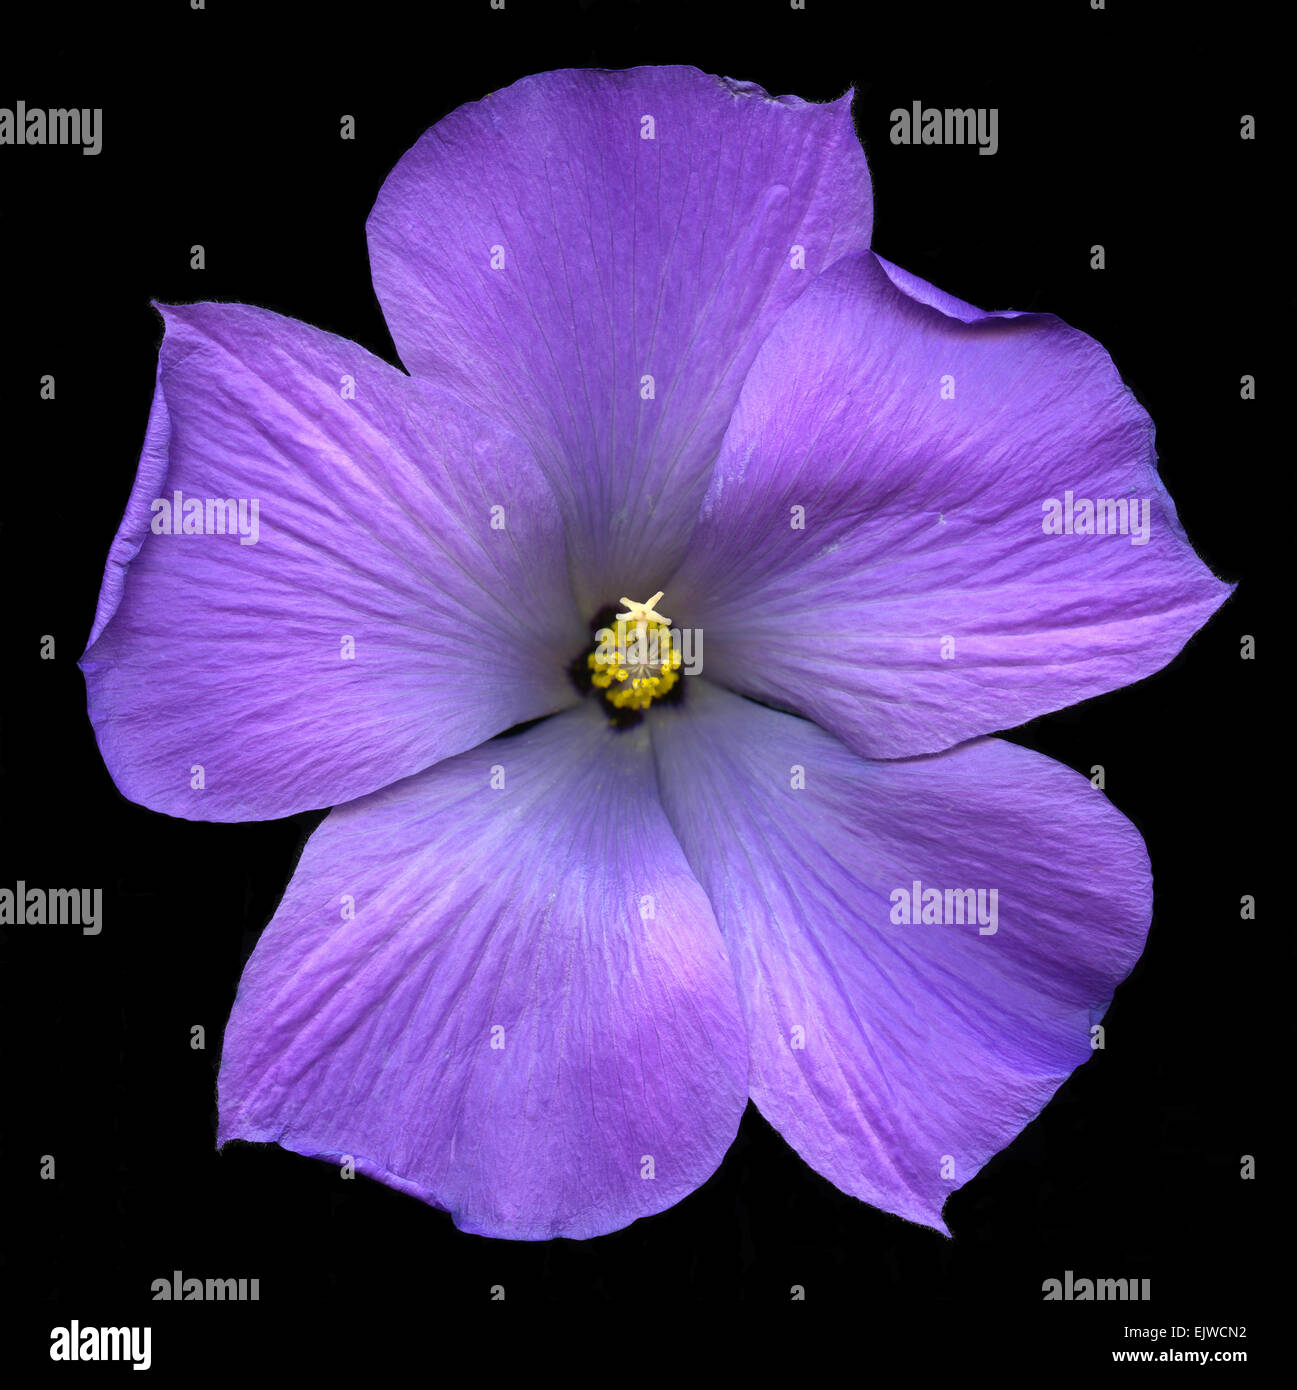 A single purple Hibiscus flower isolated on black background Stock Photo